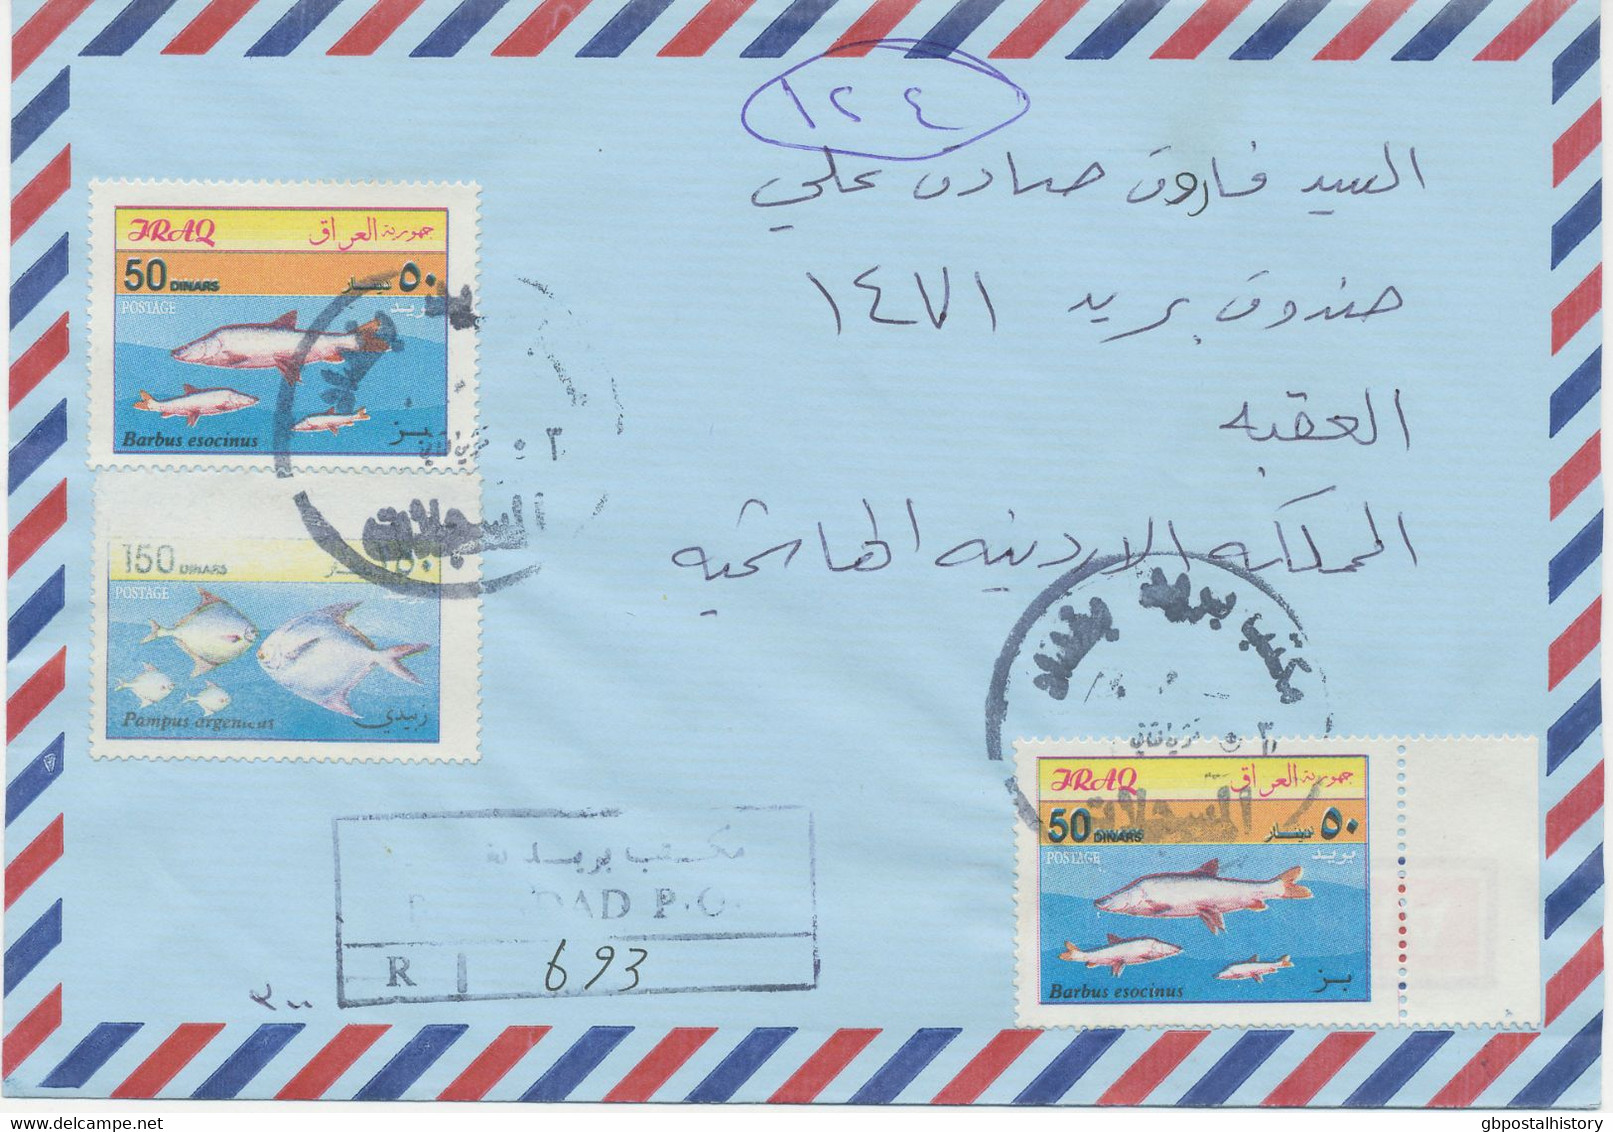 IRAQ 2001, Fish 25D, 50D And 150D Together With Football 25D On Superb Registered Airmail Cover, MAJOR ERROR & VARIETY: - Irak